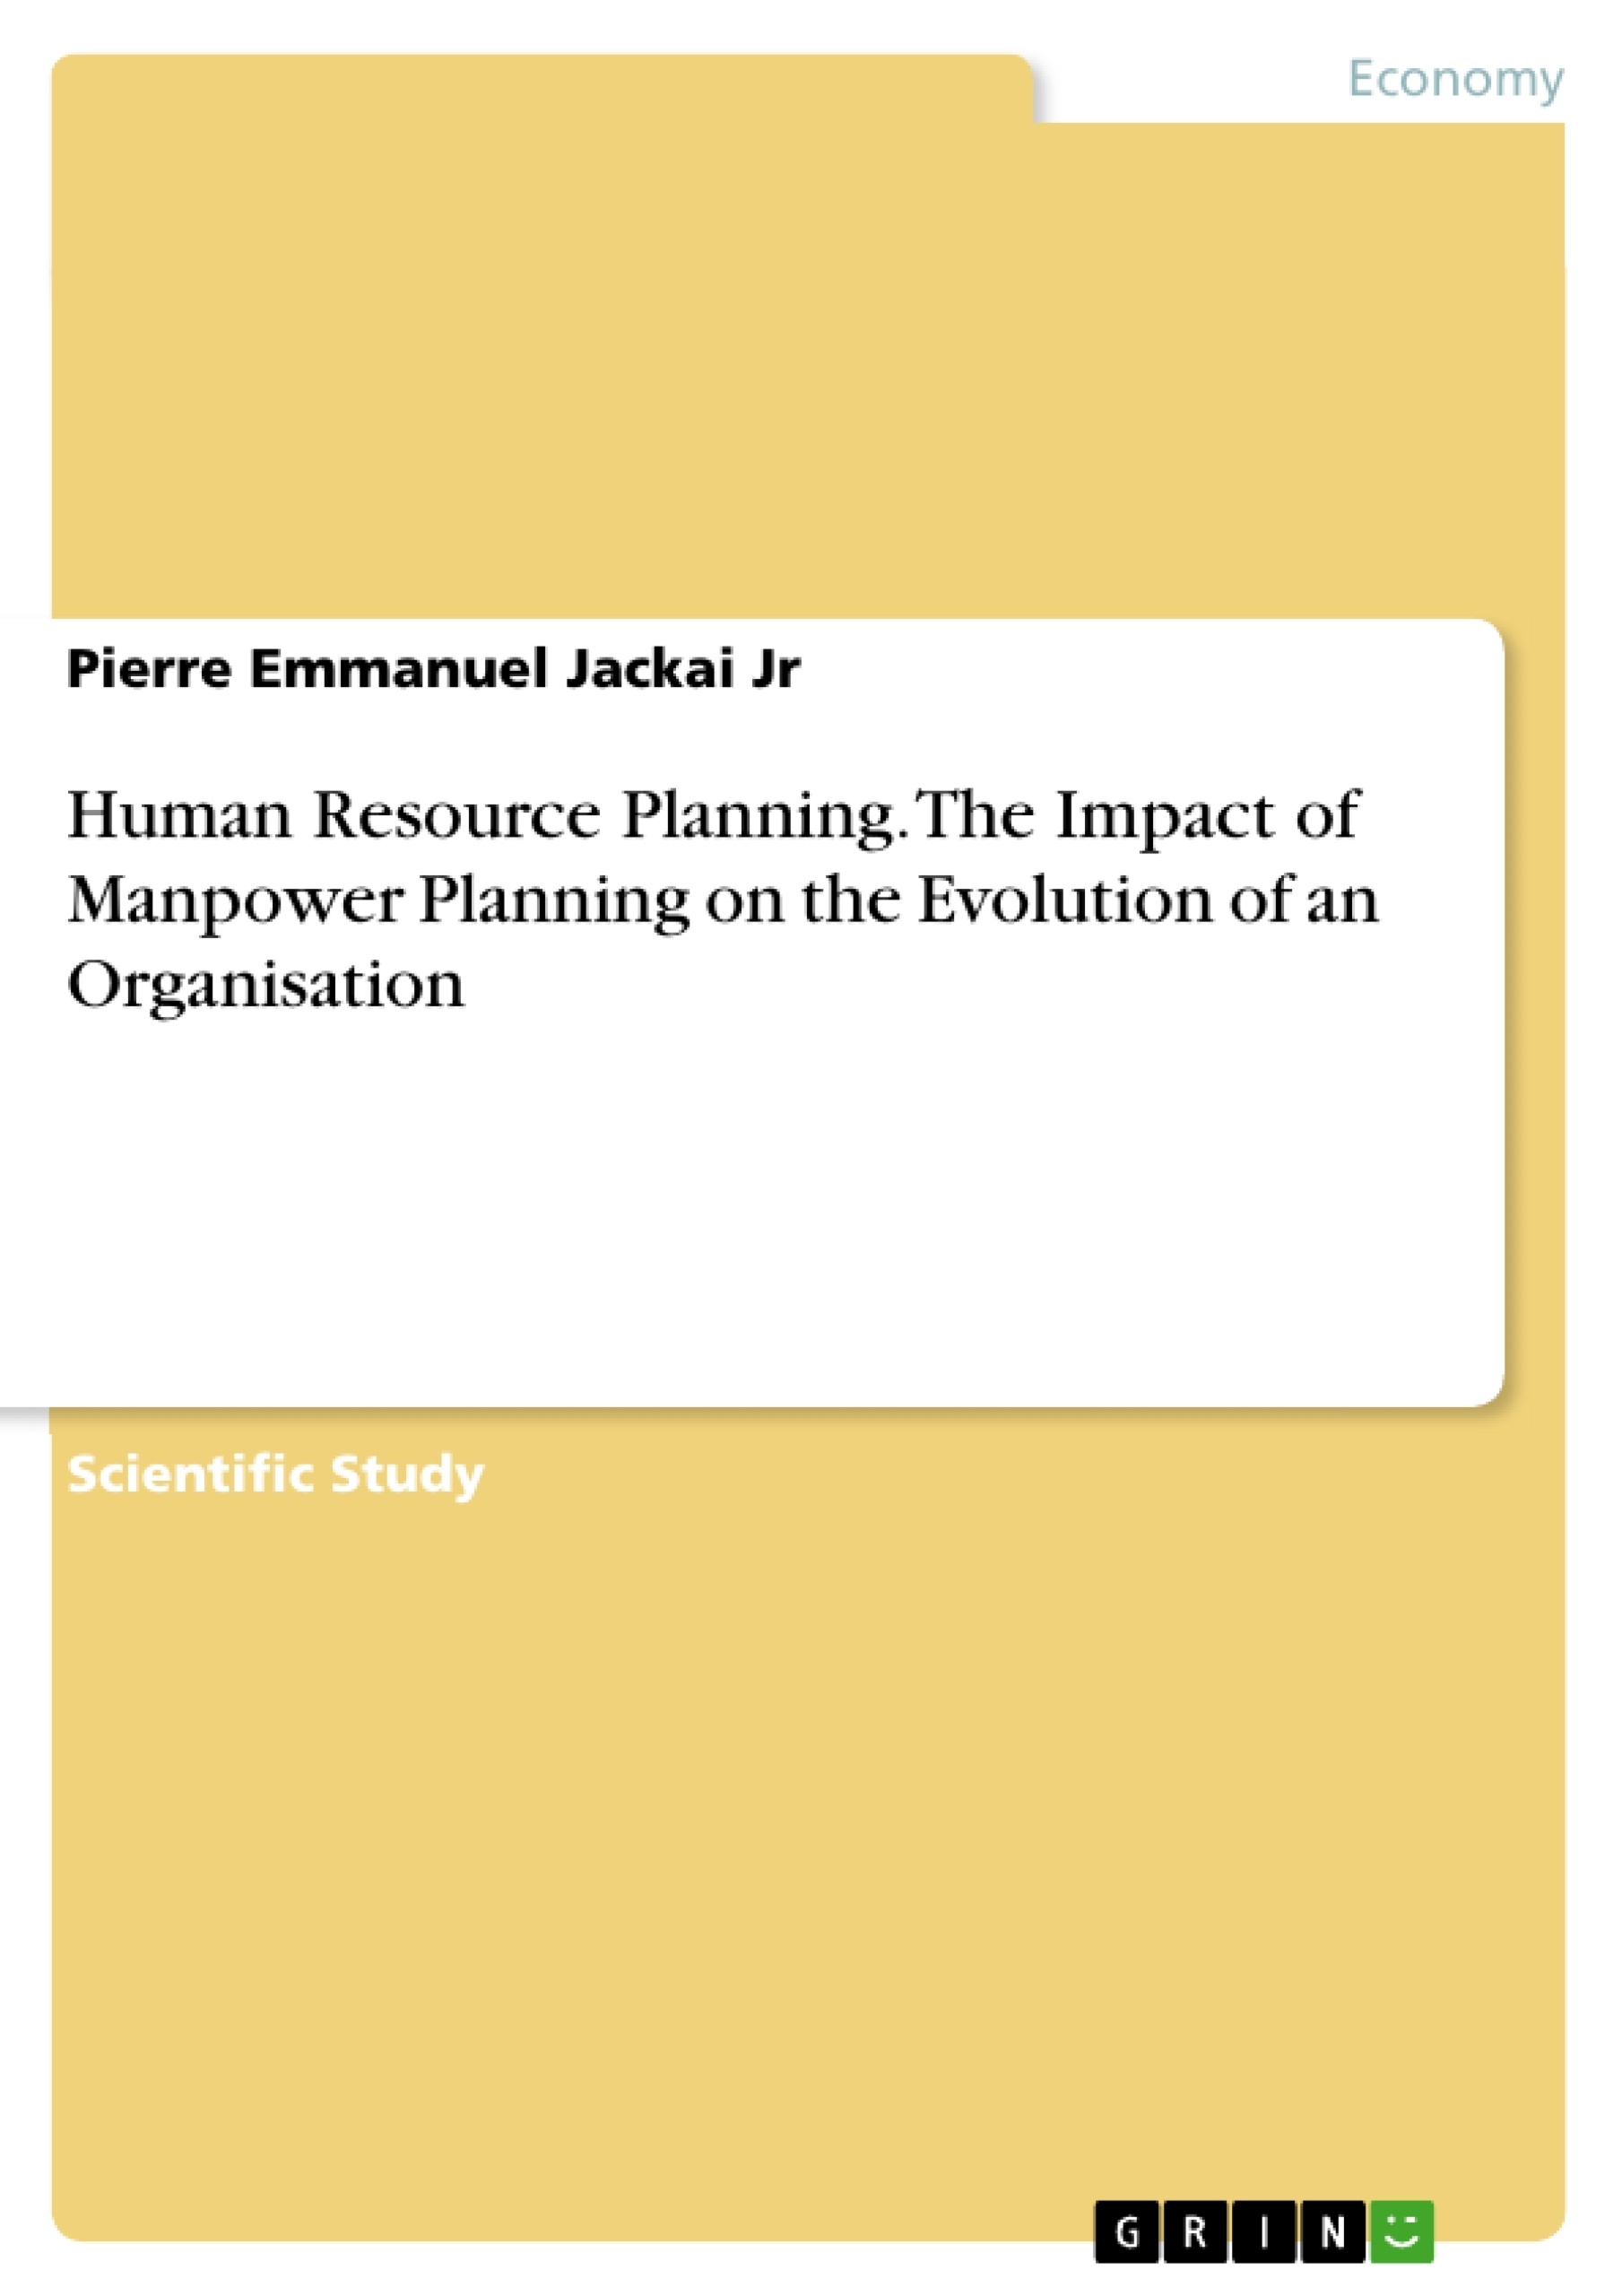 Title: Human Resource Planning. The Impact of Manpower Planning on the Evolution of an Organisation